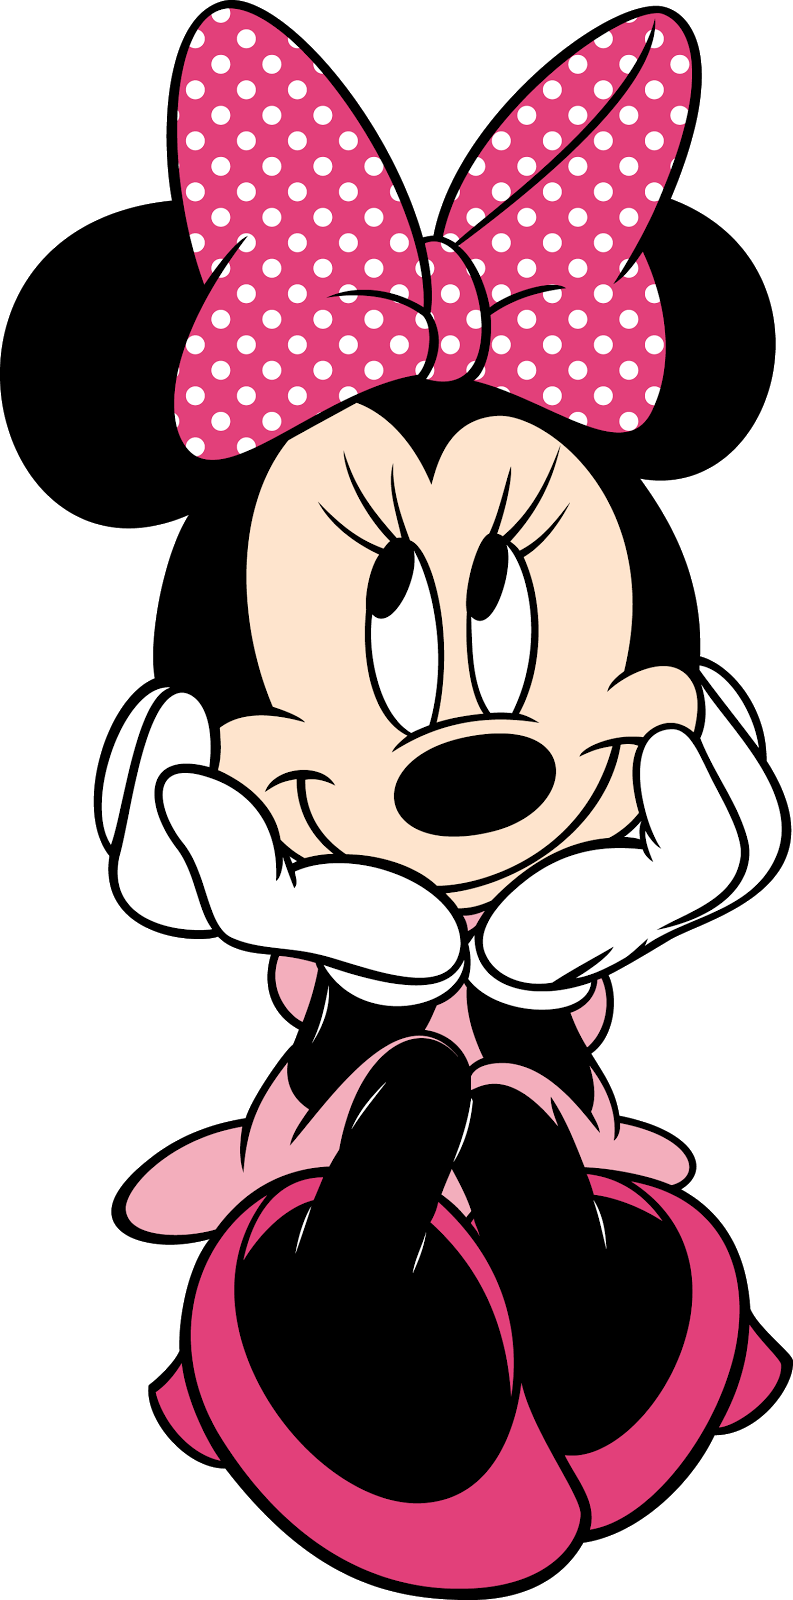 Minnie mouse clip art free 